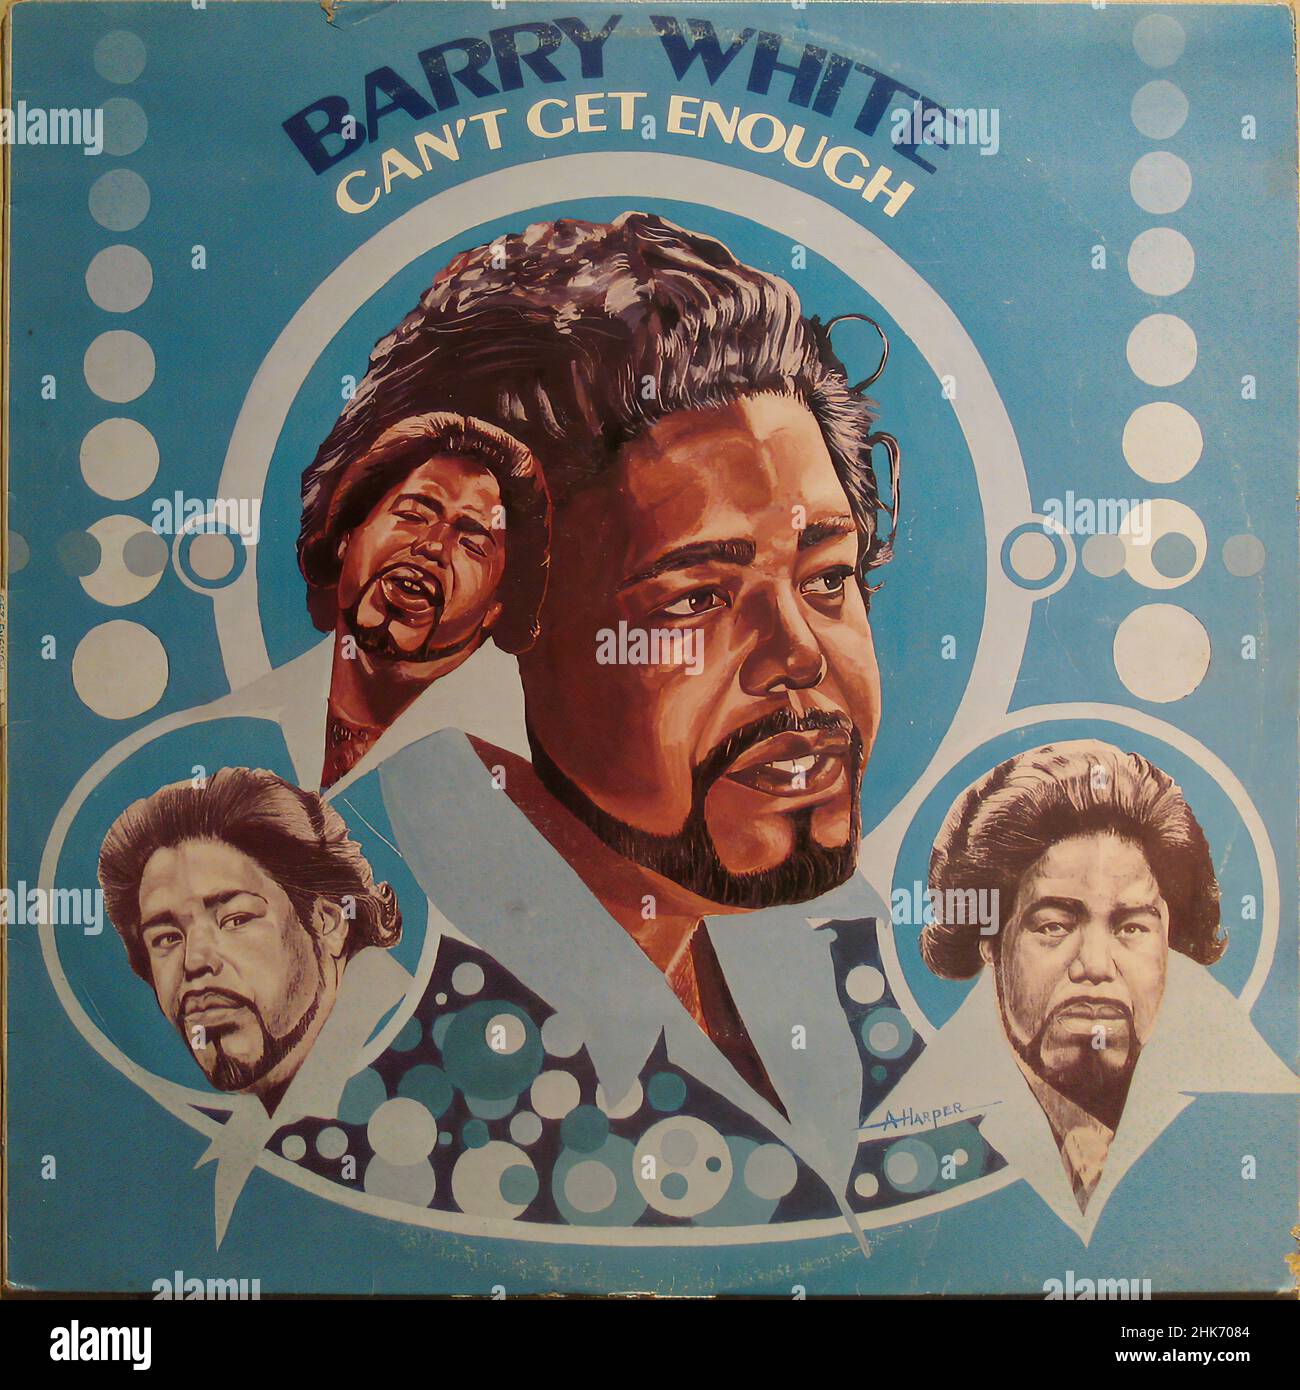 Can't Get Enough Barry White - Vintage vinyl album cover Stock Photo - Alamy